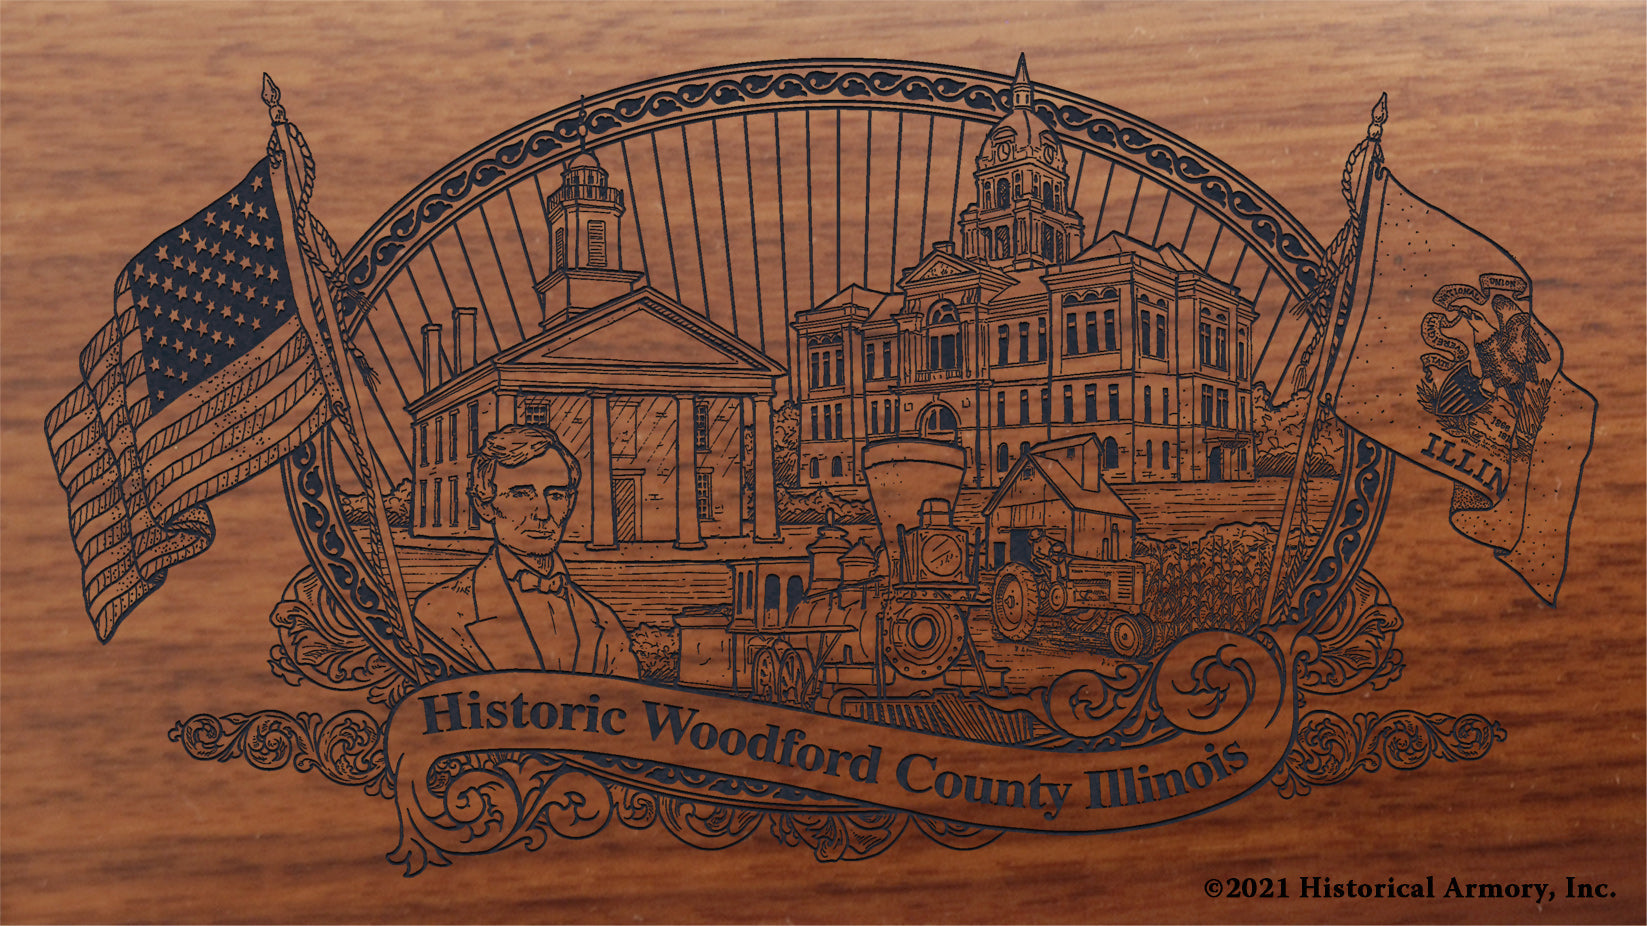 Engraved artwork | History of Woodford County Illinois | Historical Armory